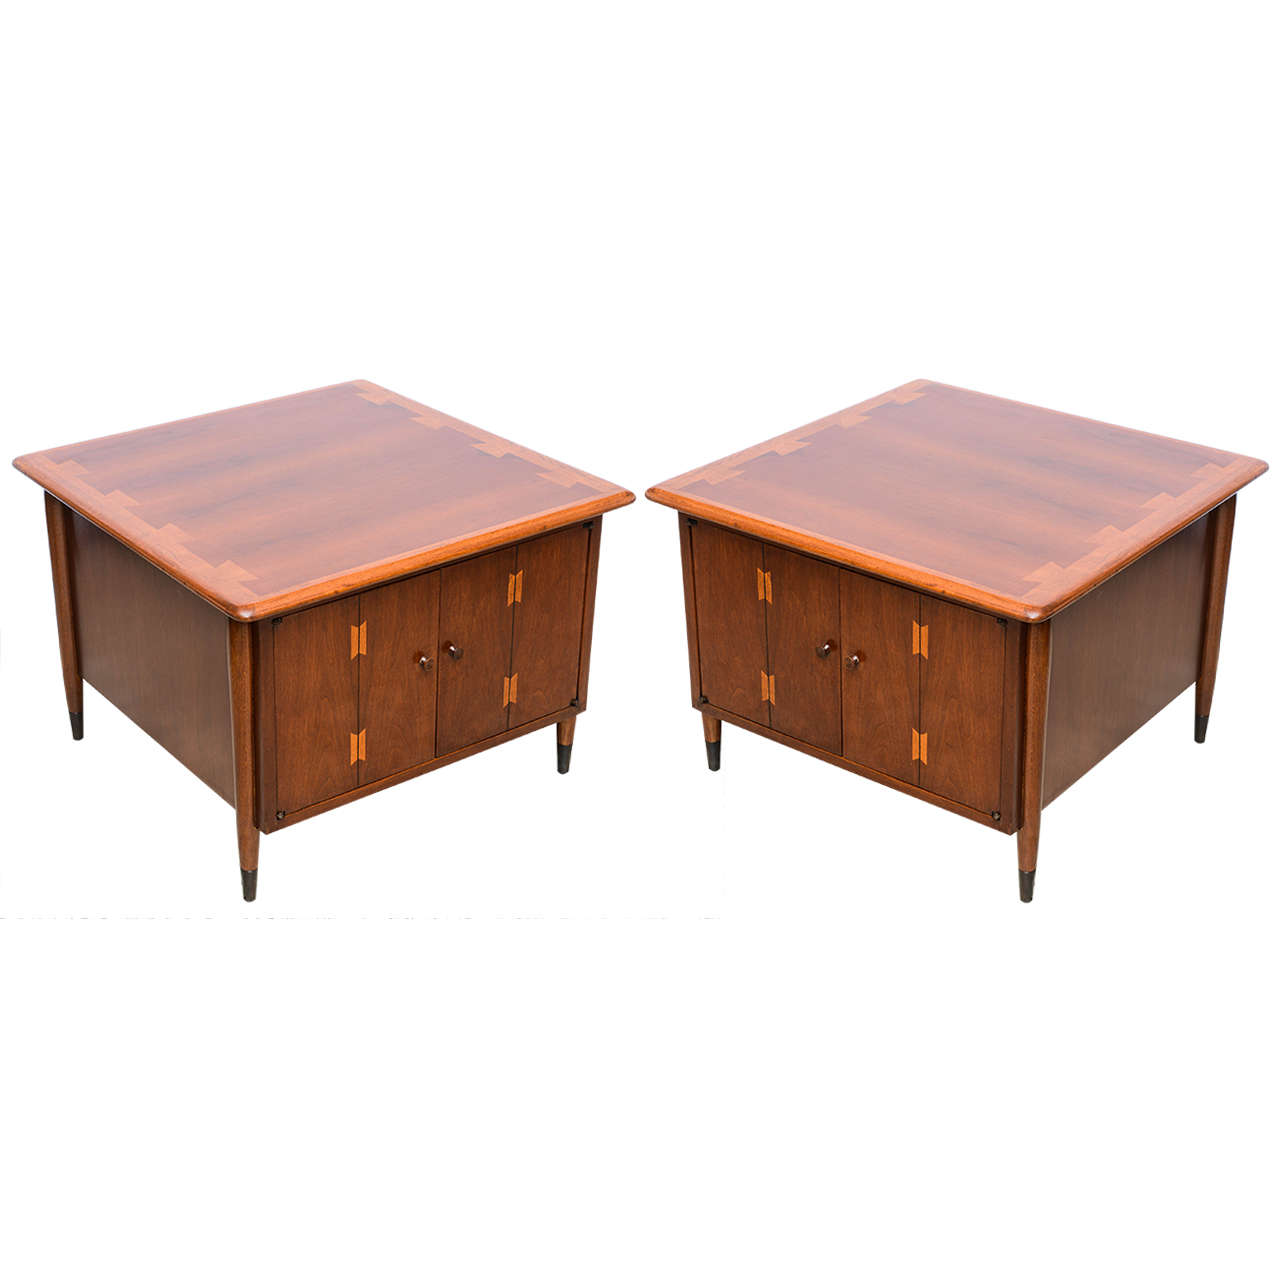 Inlaid Lane End Tables with Double Doors from Acclaim Series, USA 1960s